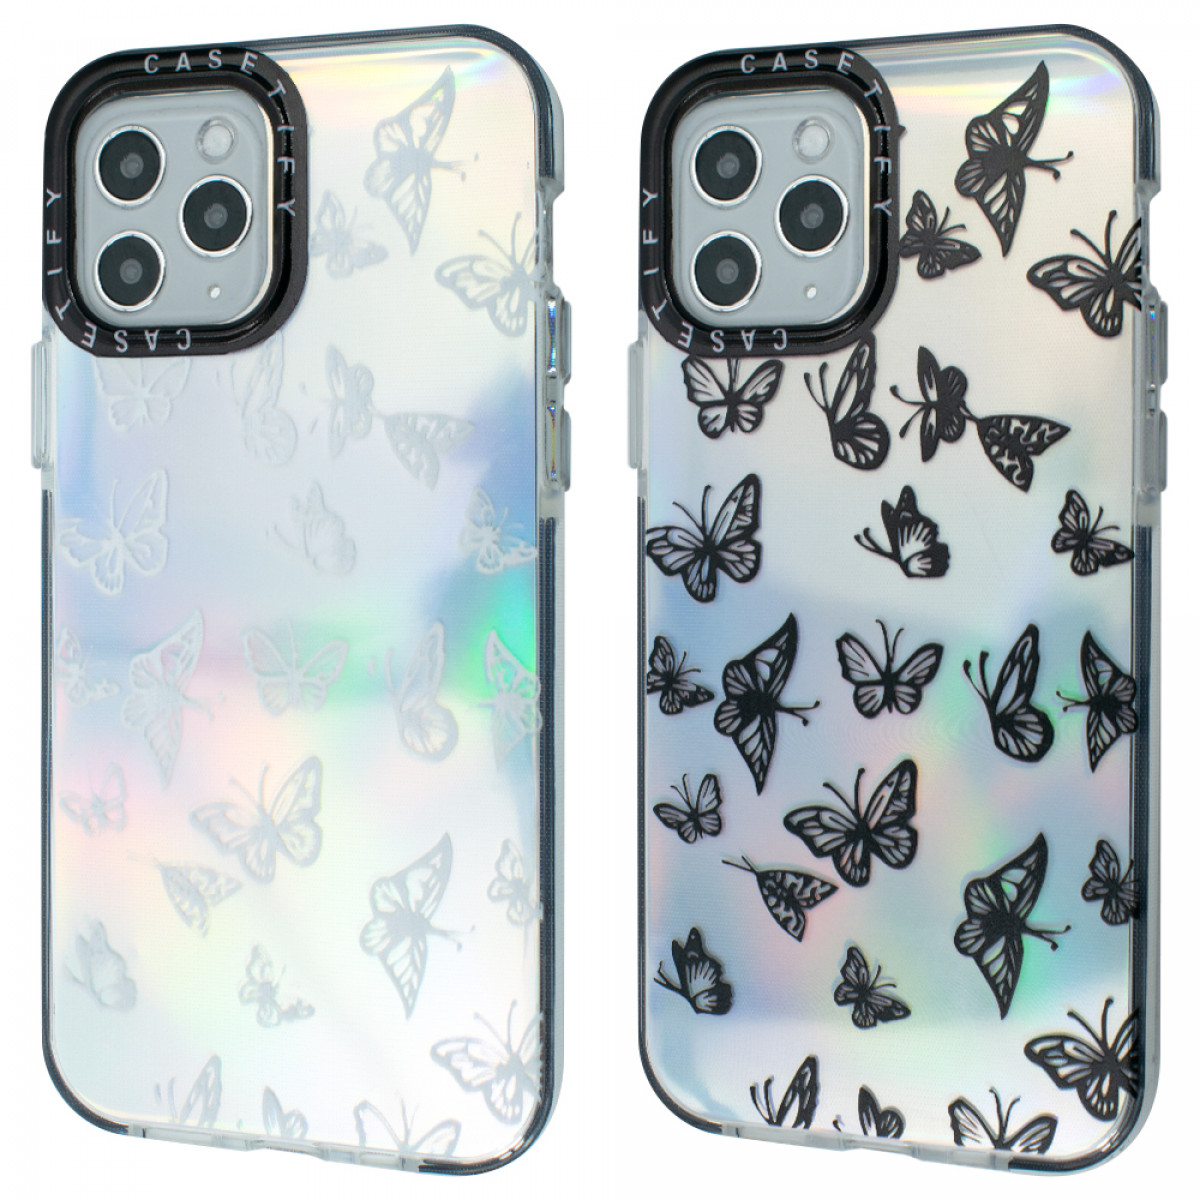 TPU Gradient Case Butterfly Apple Iphone 11 Pro